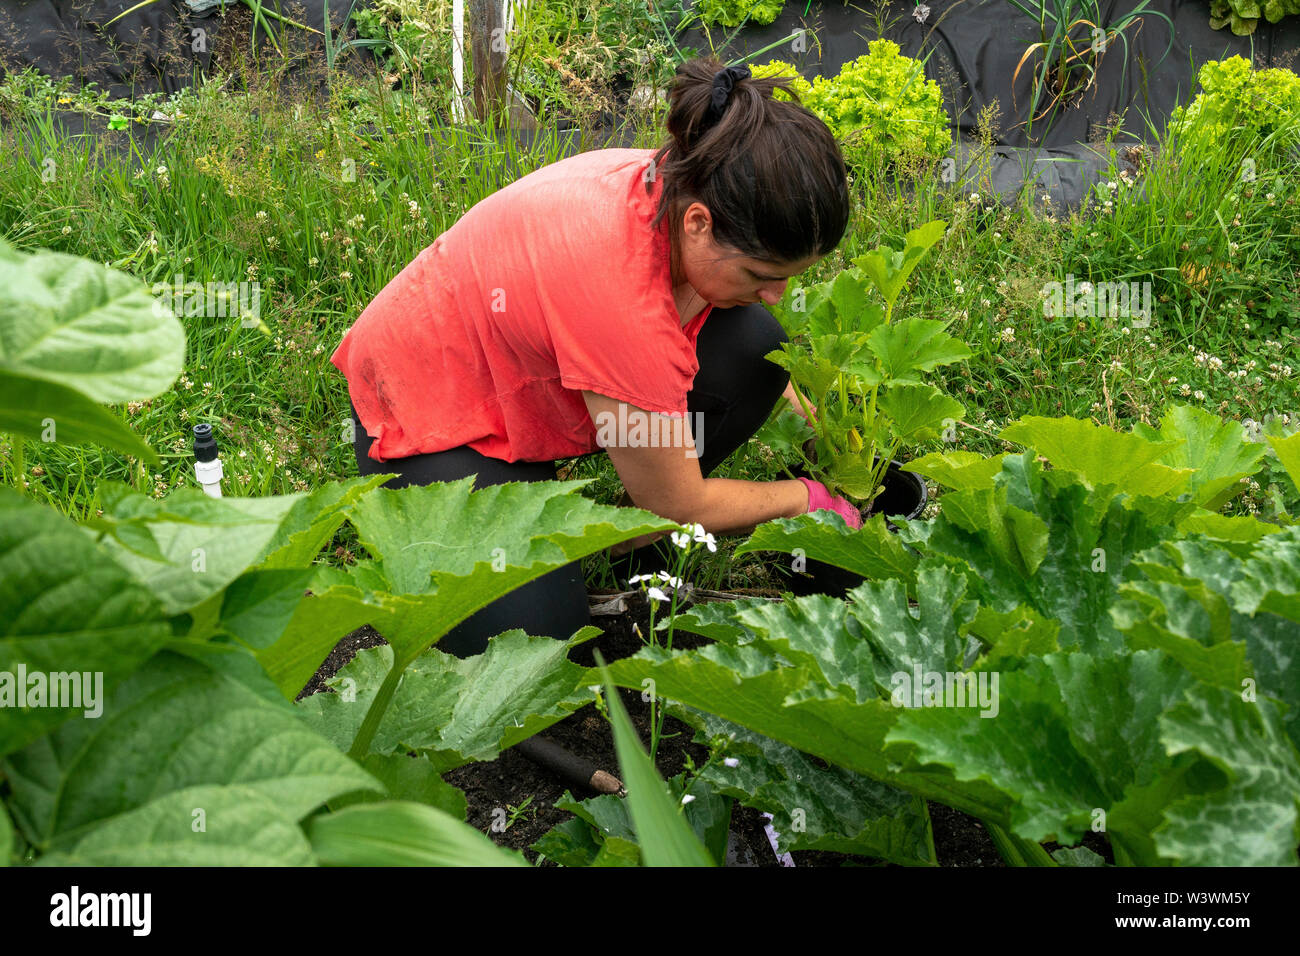 Mid length view of a women working in her backyard vegetable garden. Stock Photo